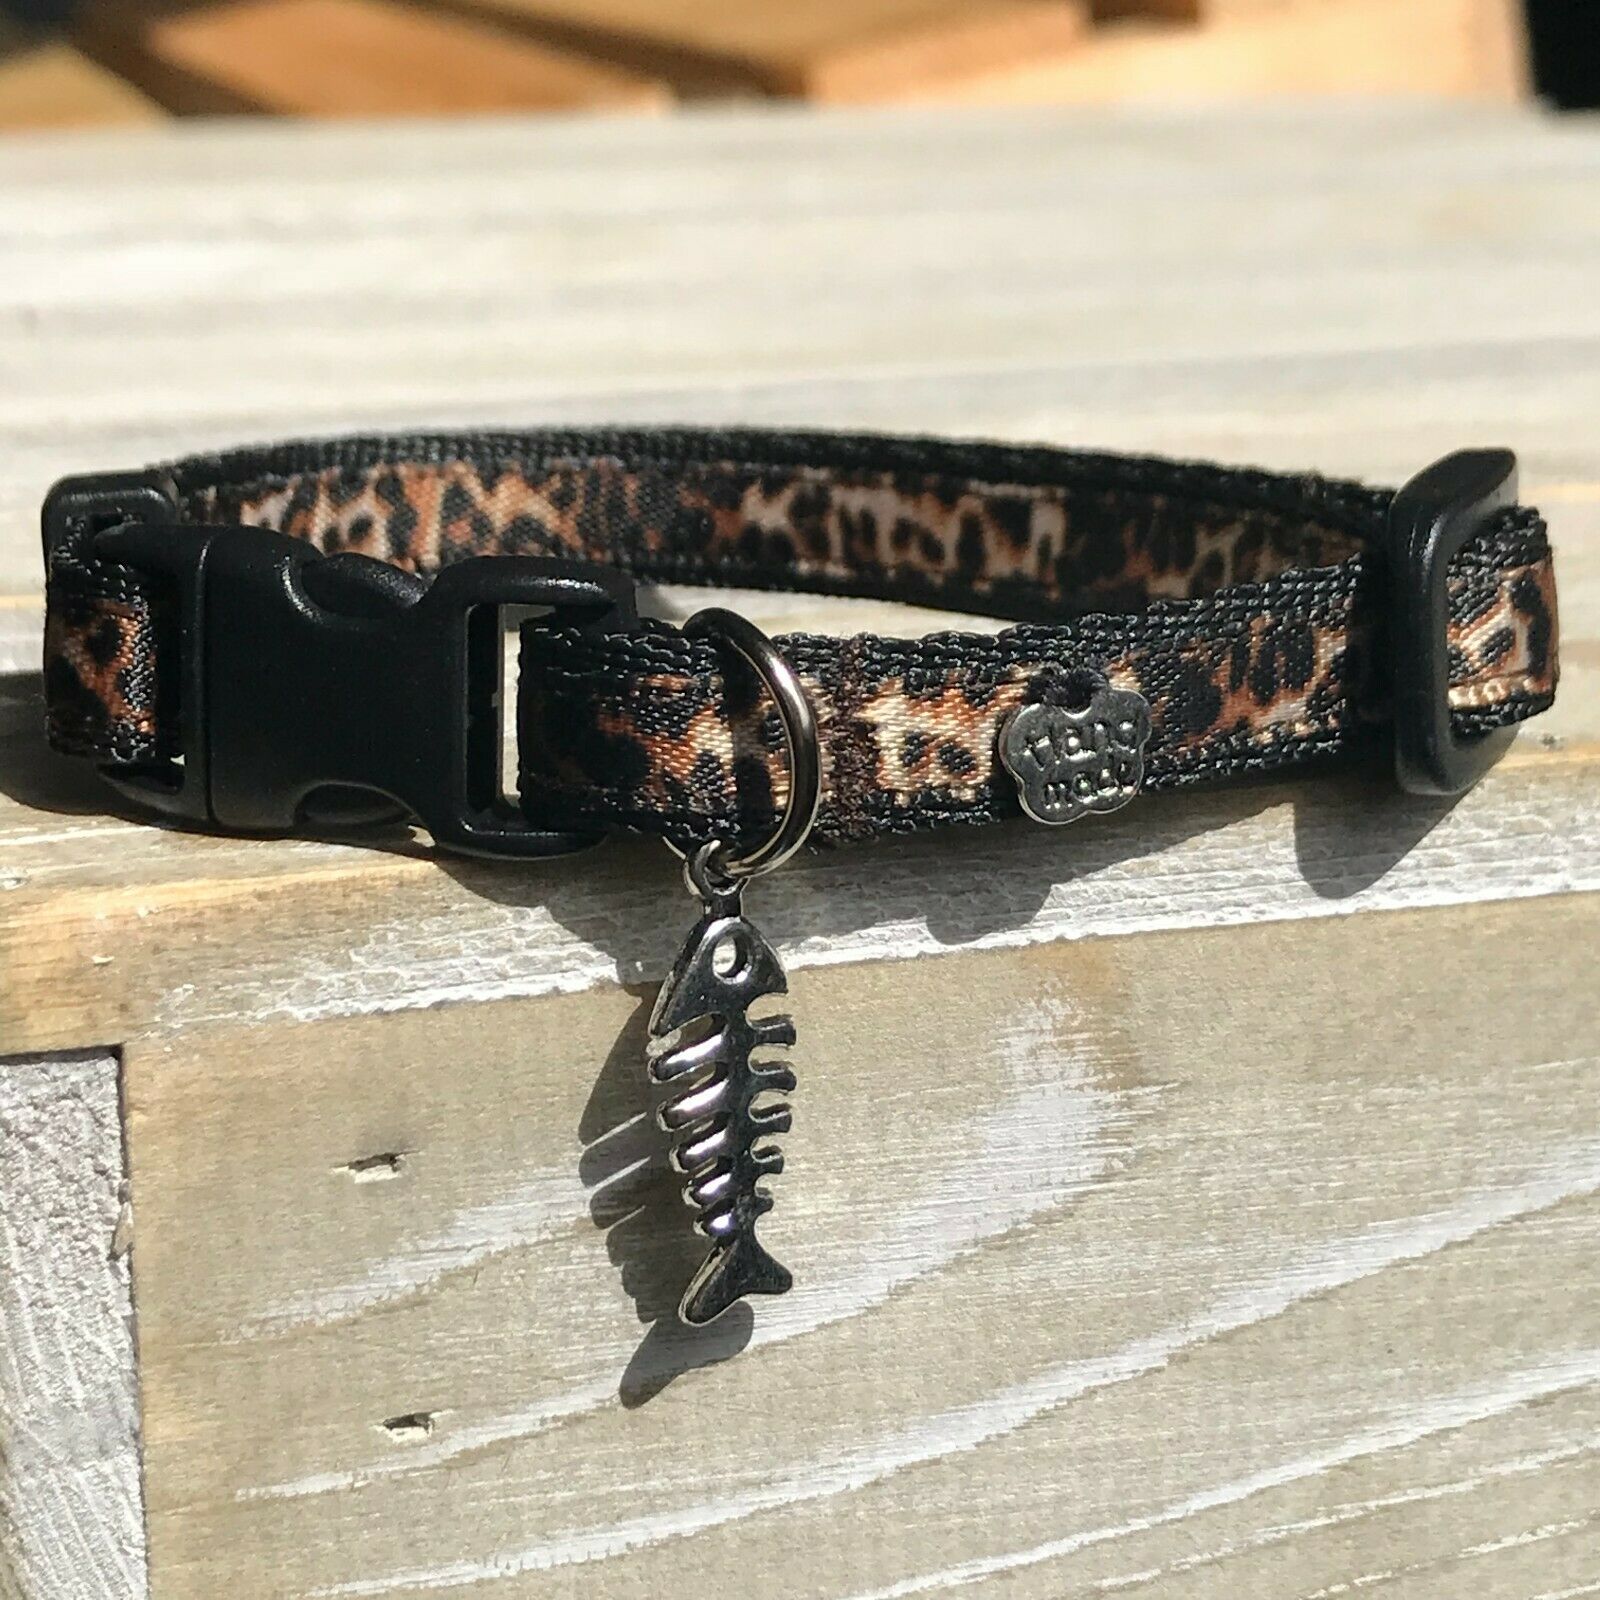 Handmade Collars With Safety Breakaway Buckle For Cats